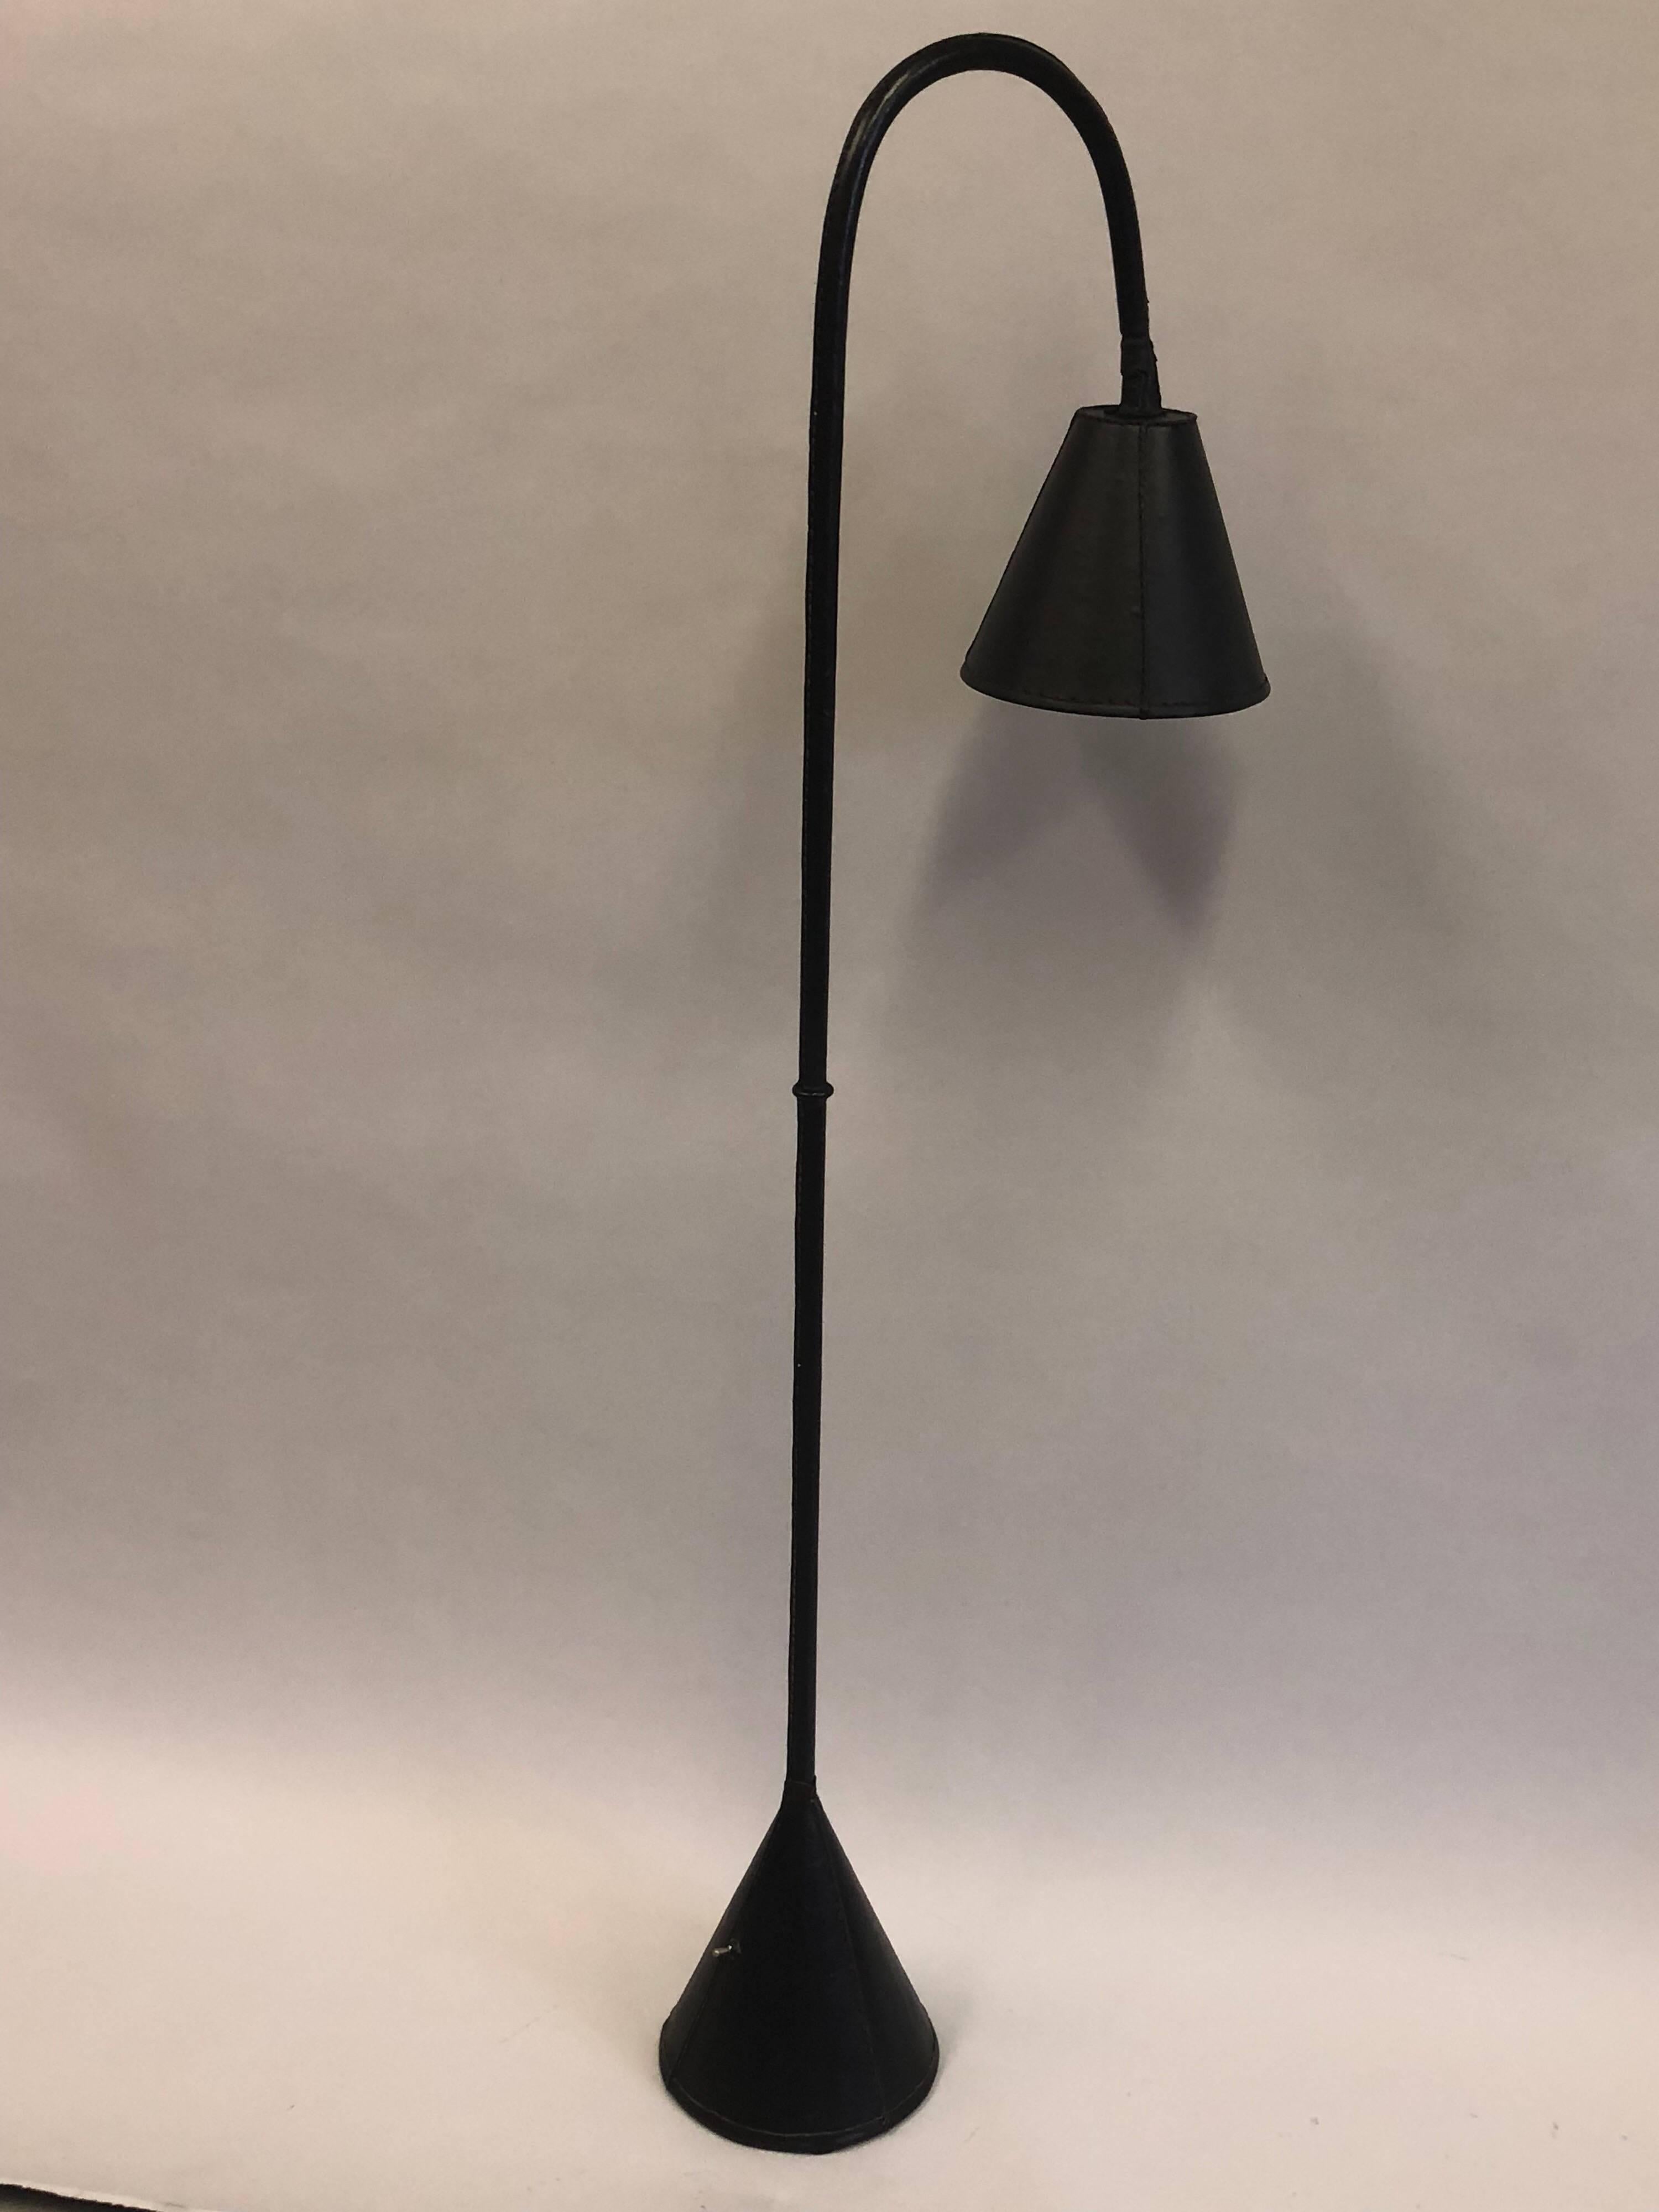 Elegant and timeless pair of French Mid-Century Modern hand stitched black leather floor lamps by Jacques Adnet. The standing lamps have a stunning form featuring a cone base with a dramatic curving stem terminating in a cone shade. Each piece is